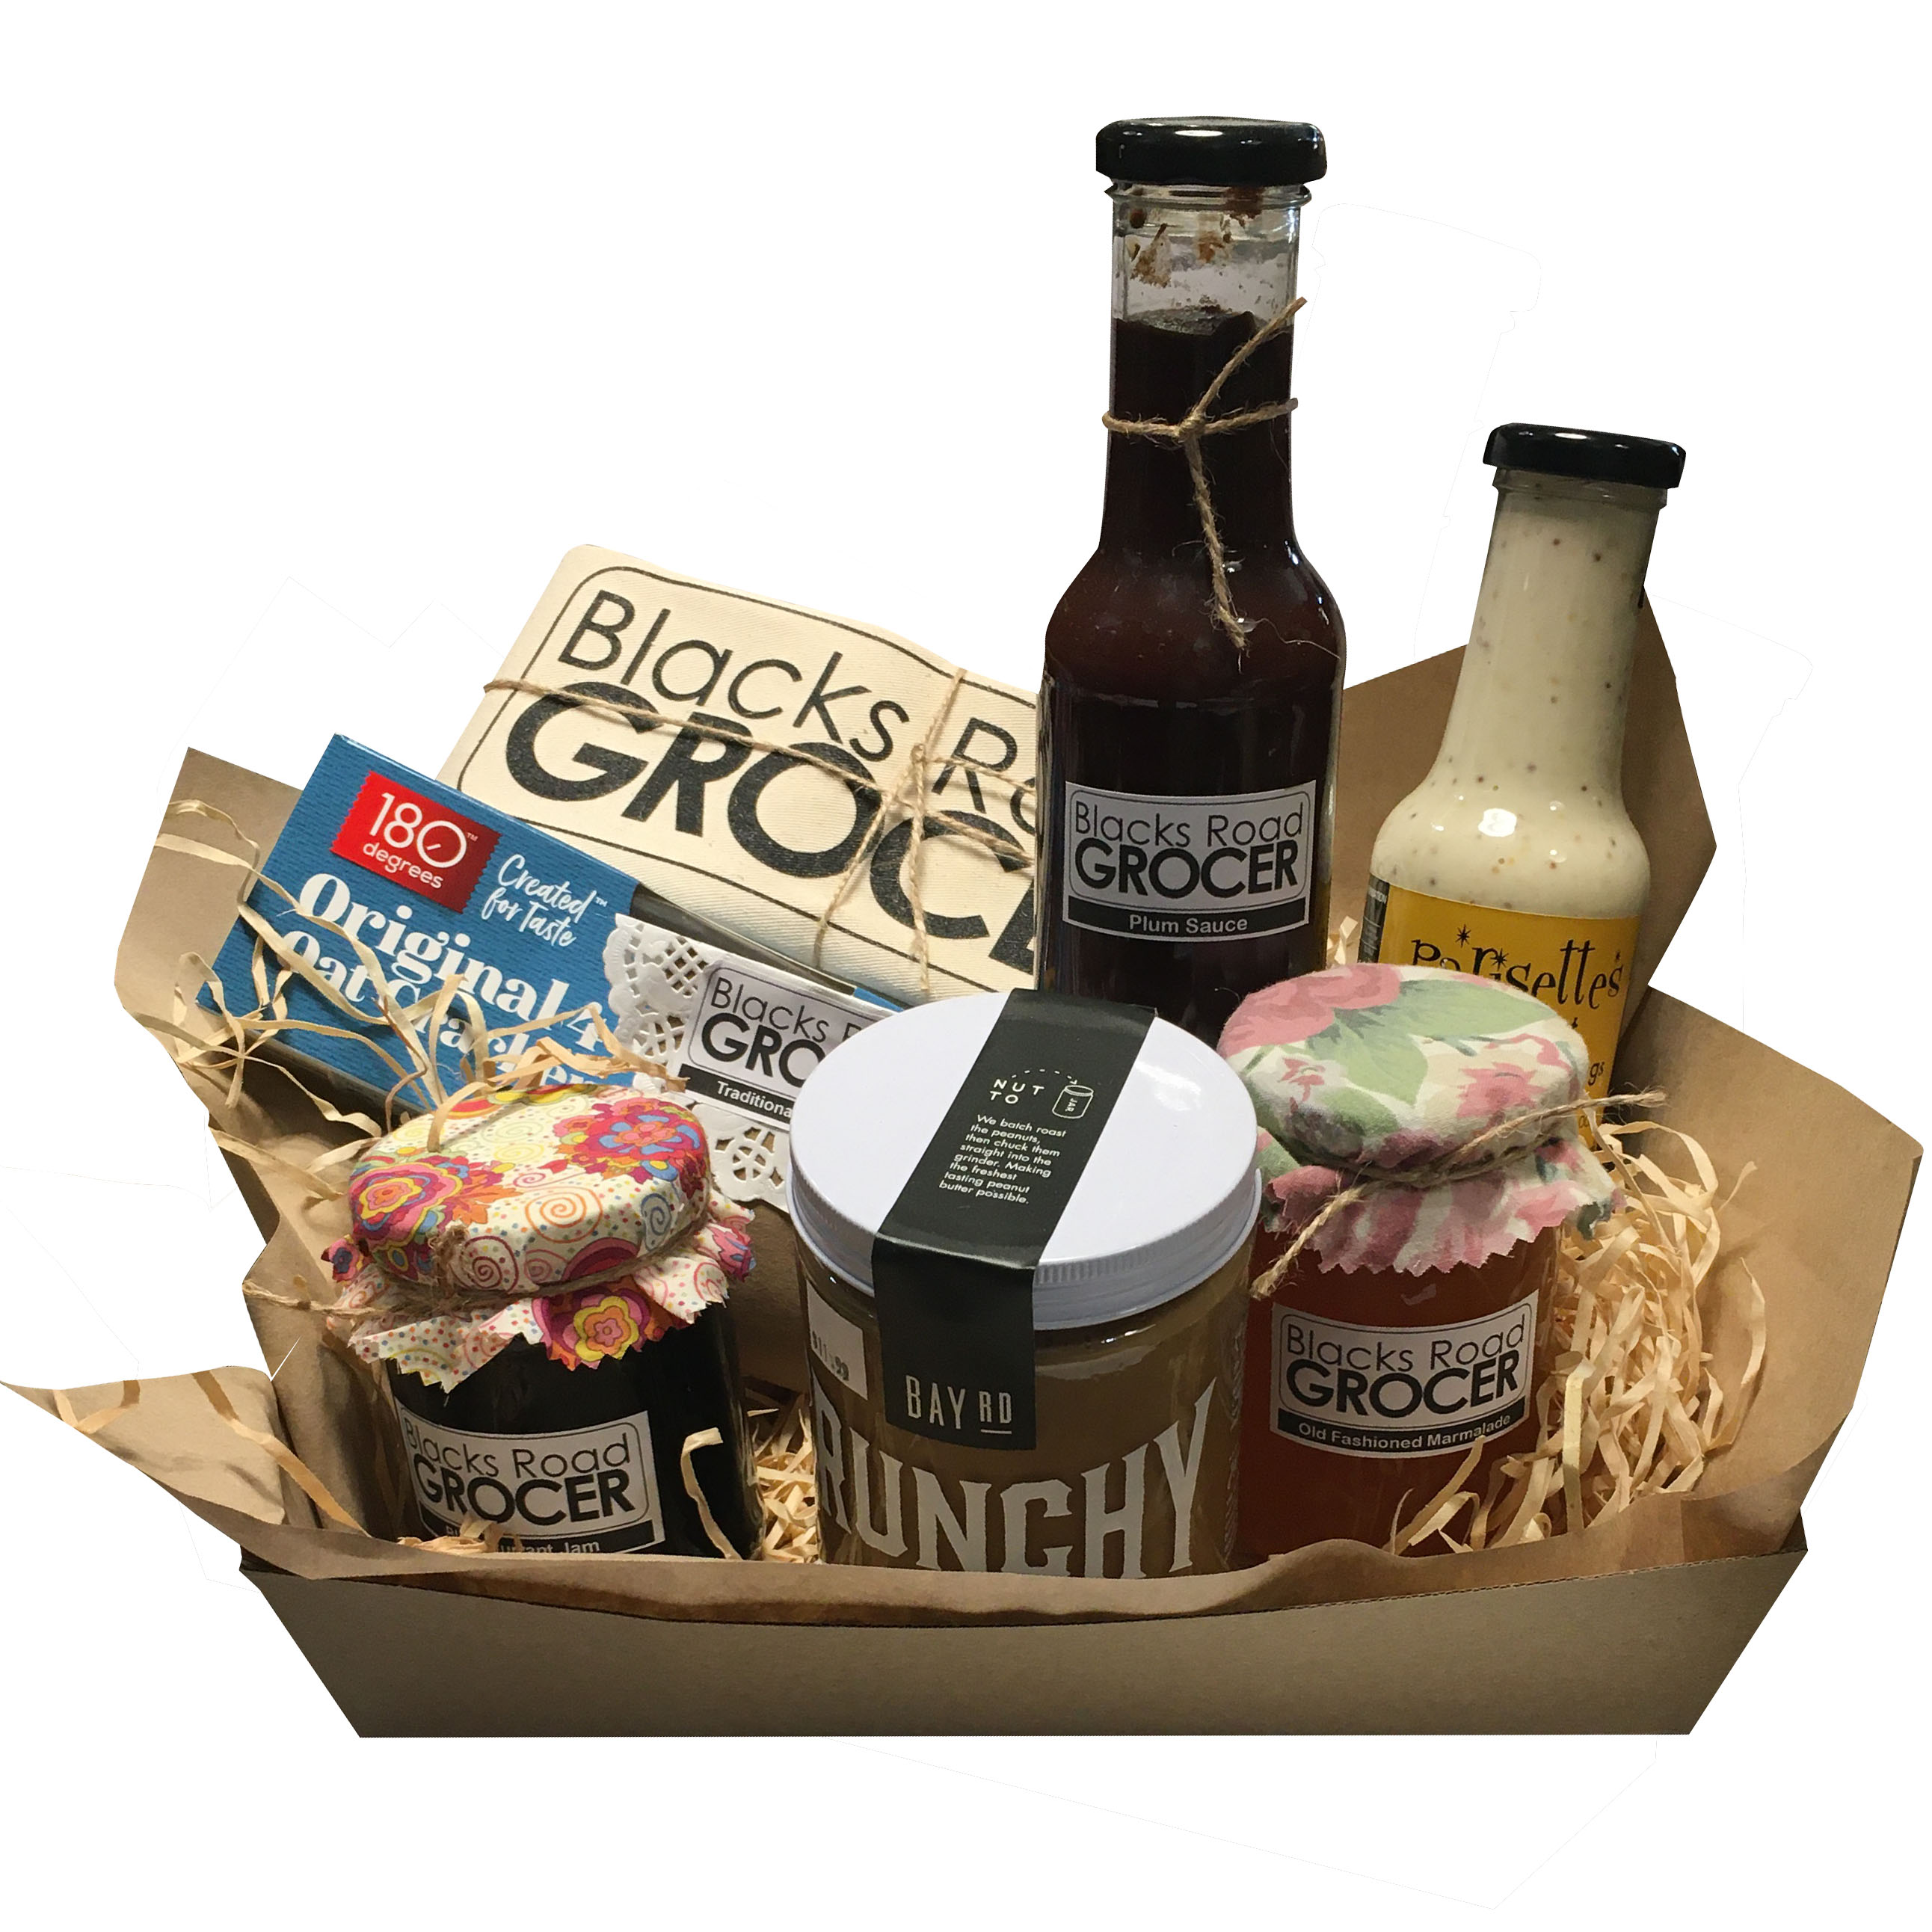 Blacks Road Grocer Gift Boxes and Hampers